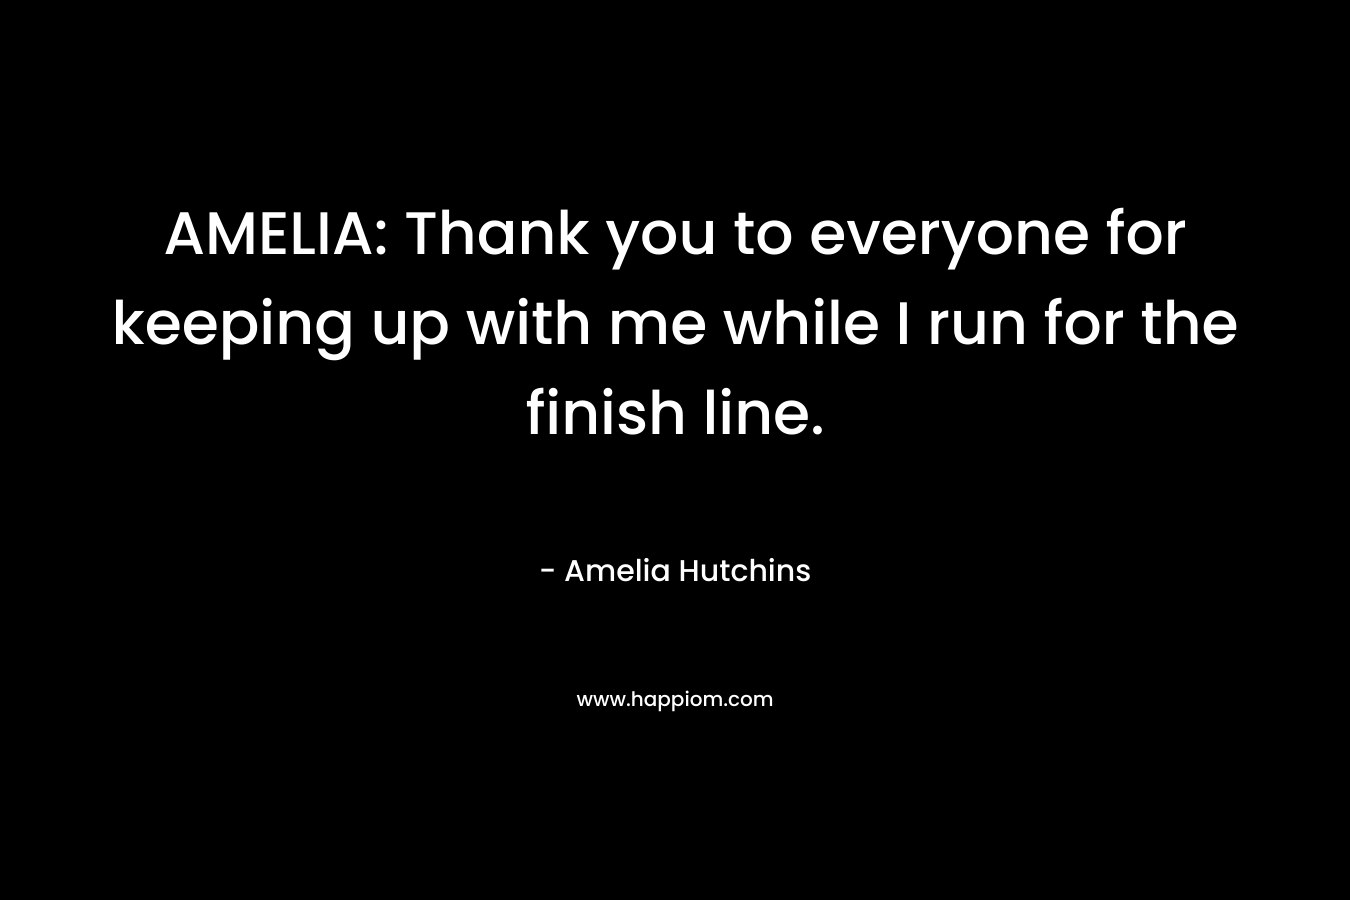 AMELIA: Thank you to everyone for keeping up with me while I run for the finish line.